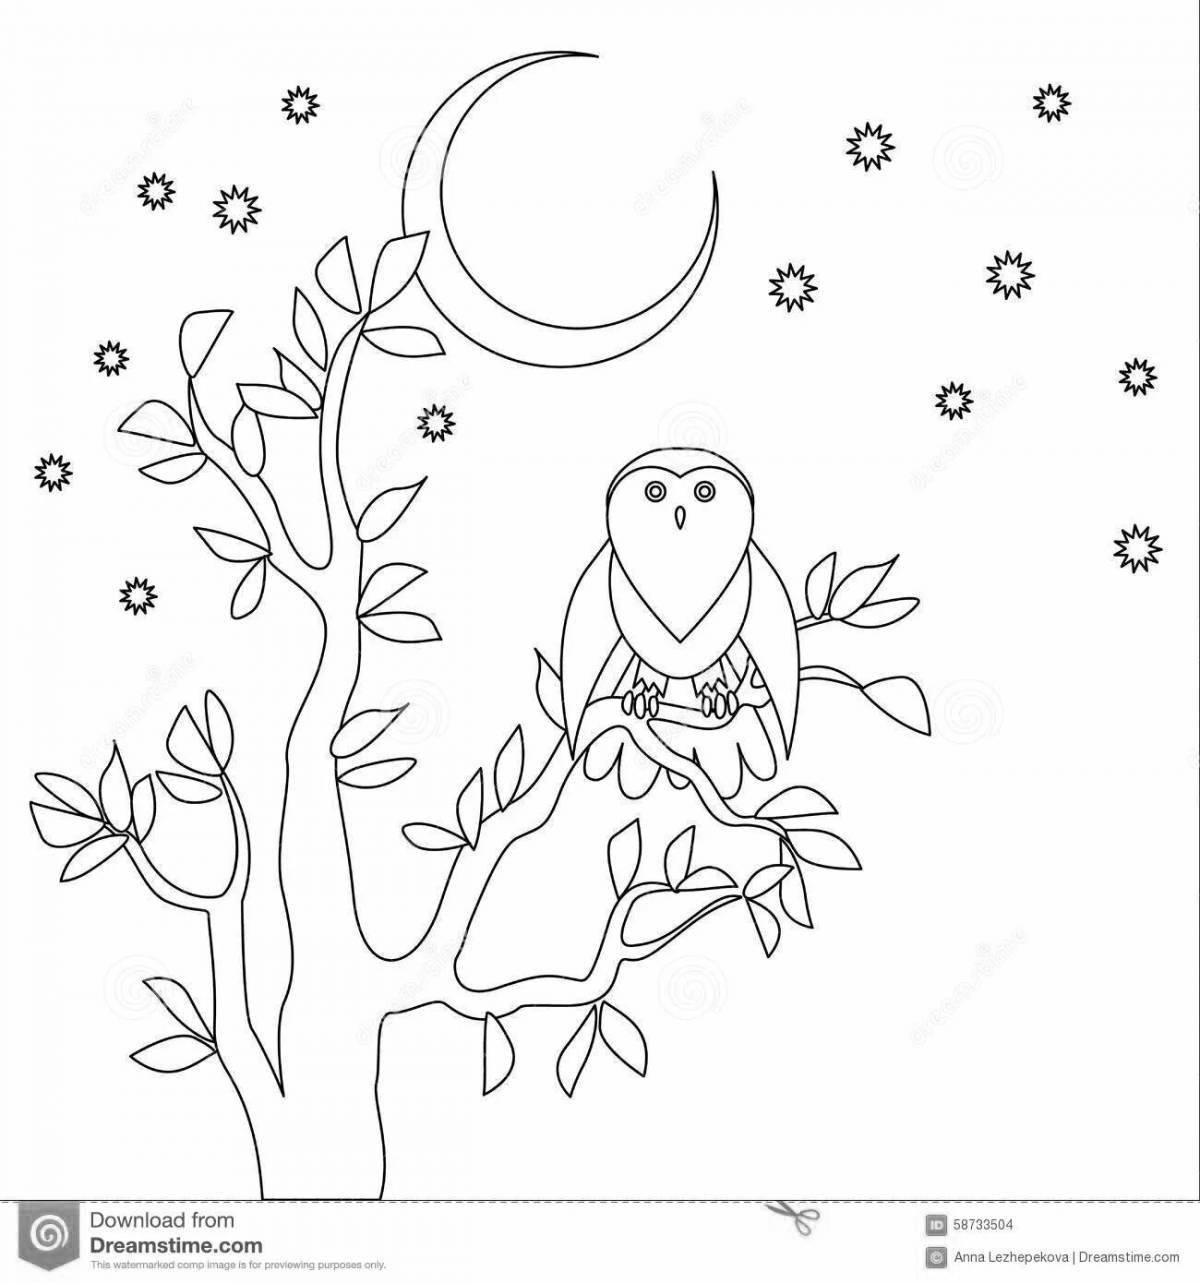 Bianca owl shiny coloring book